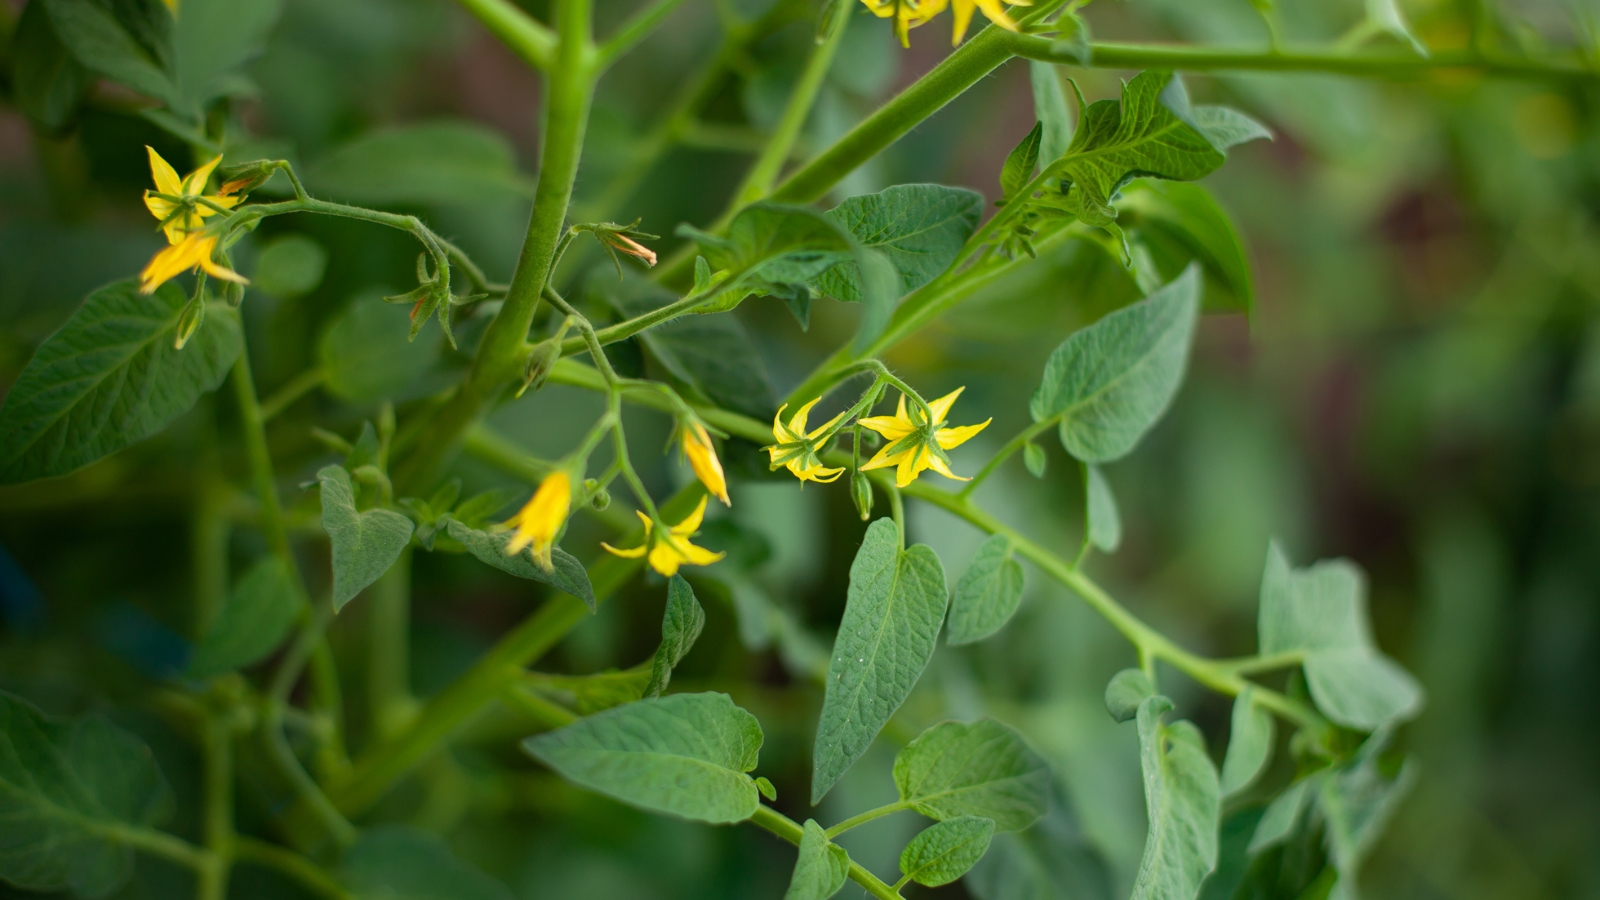 Tomato plant with yellow flowers blooming in the garden